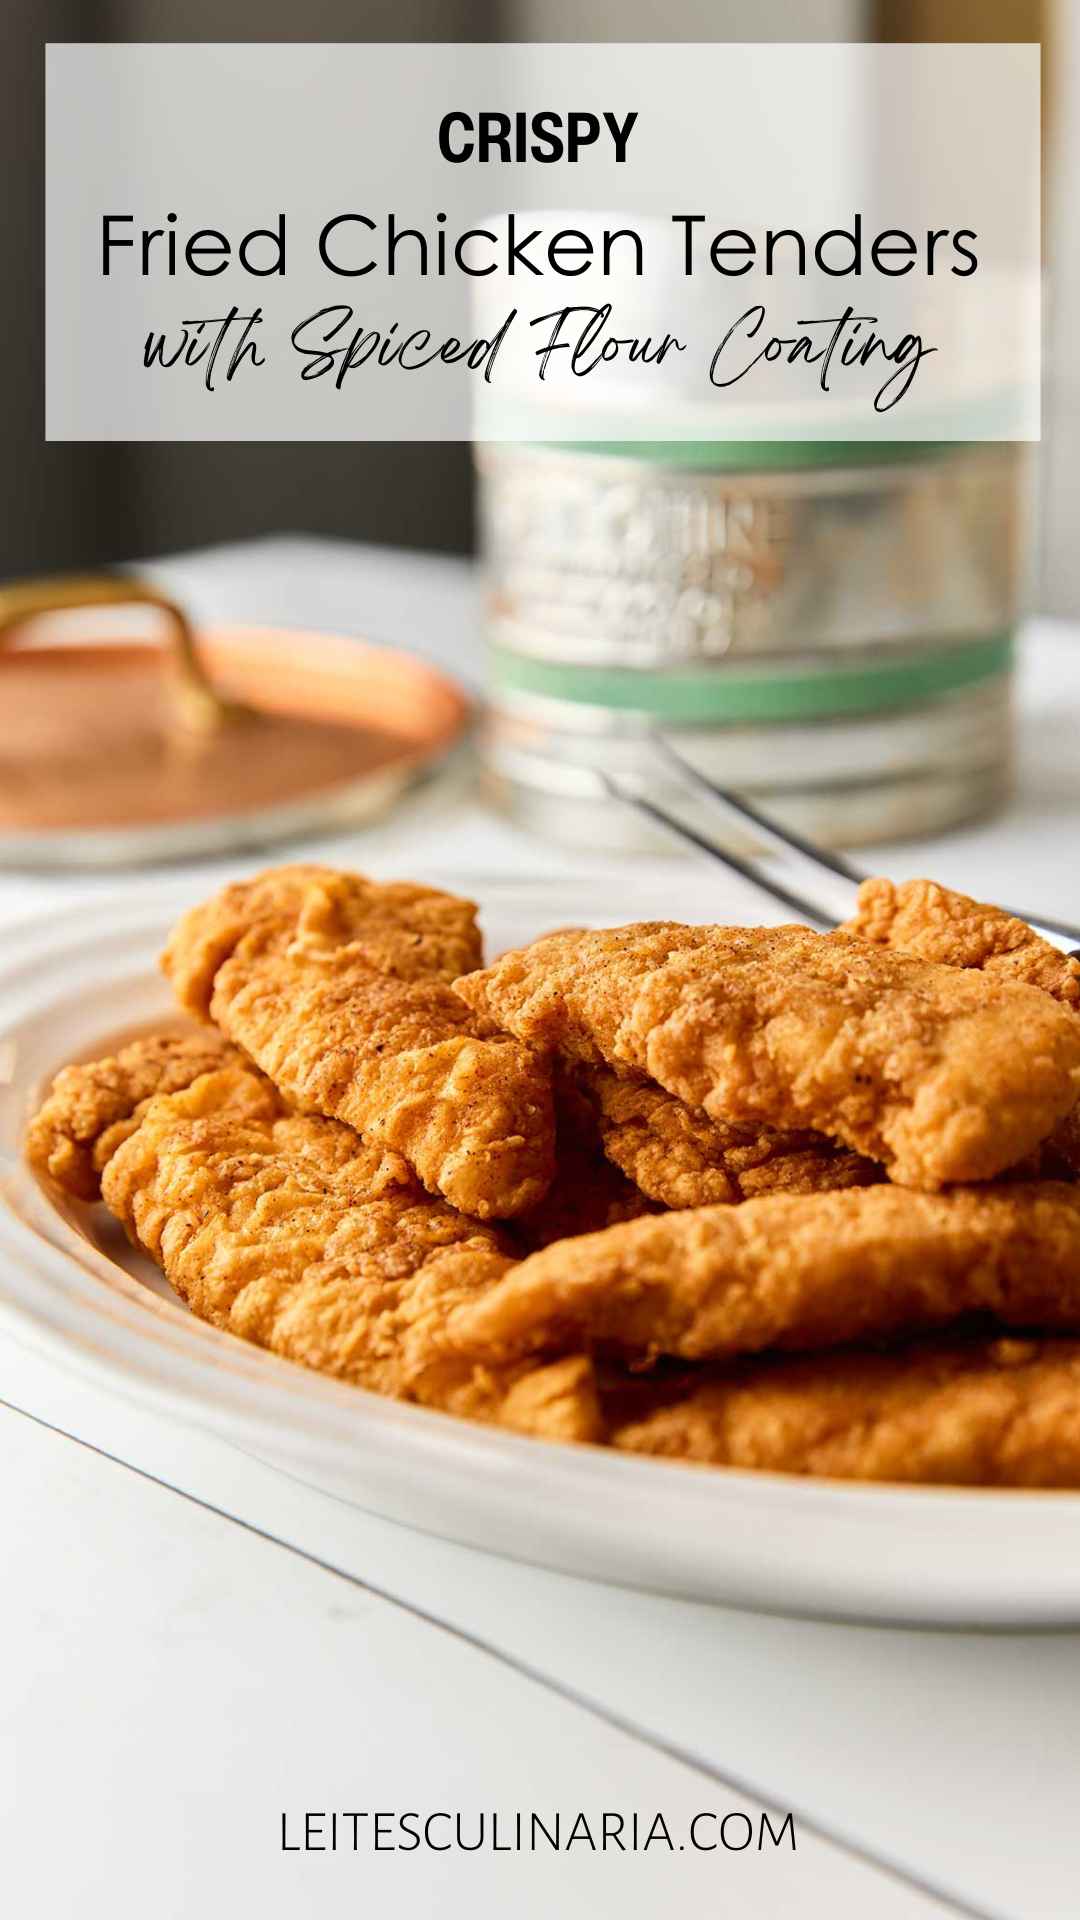 A white oval platter of pan-fried chicken tenders.